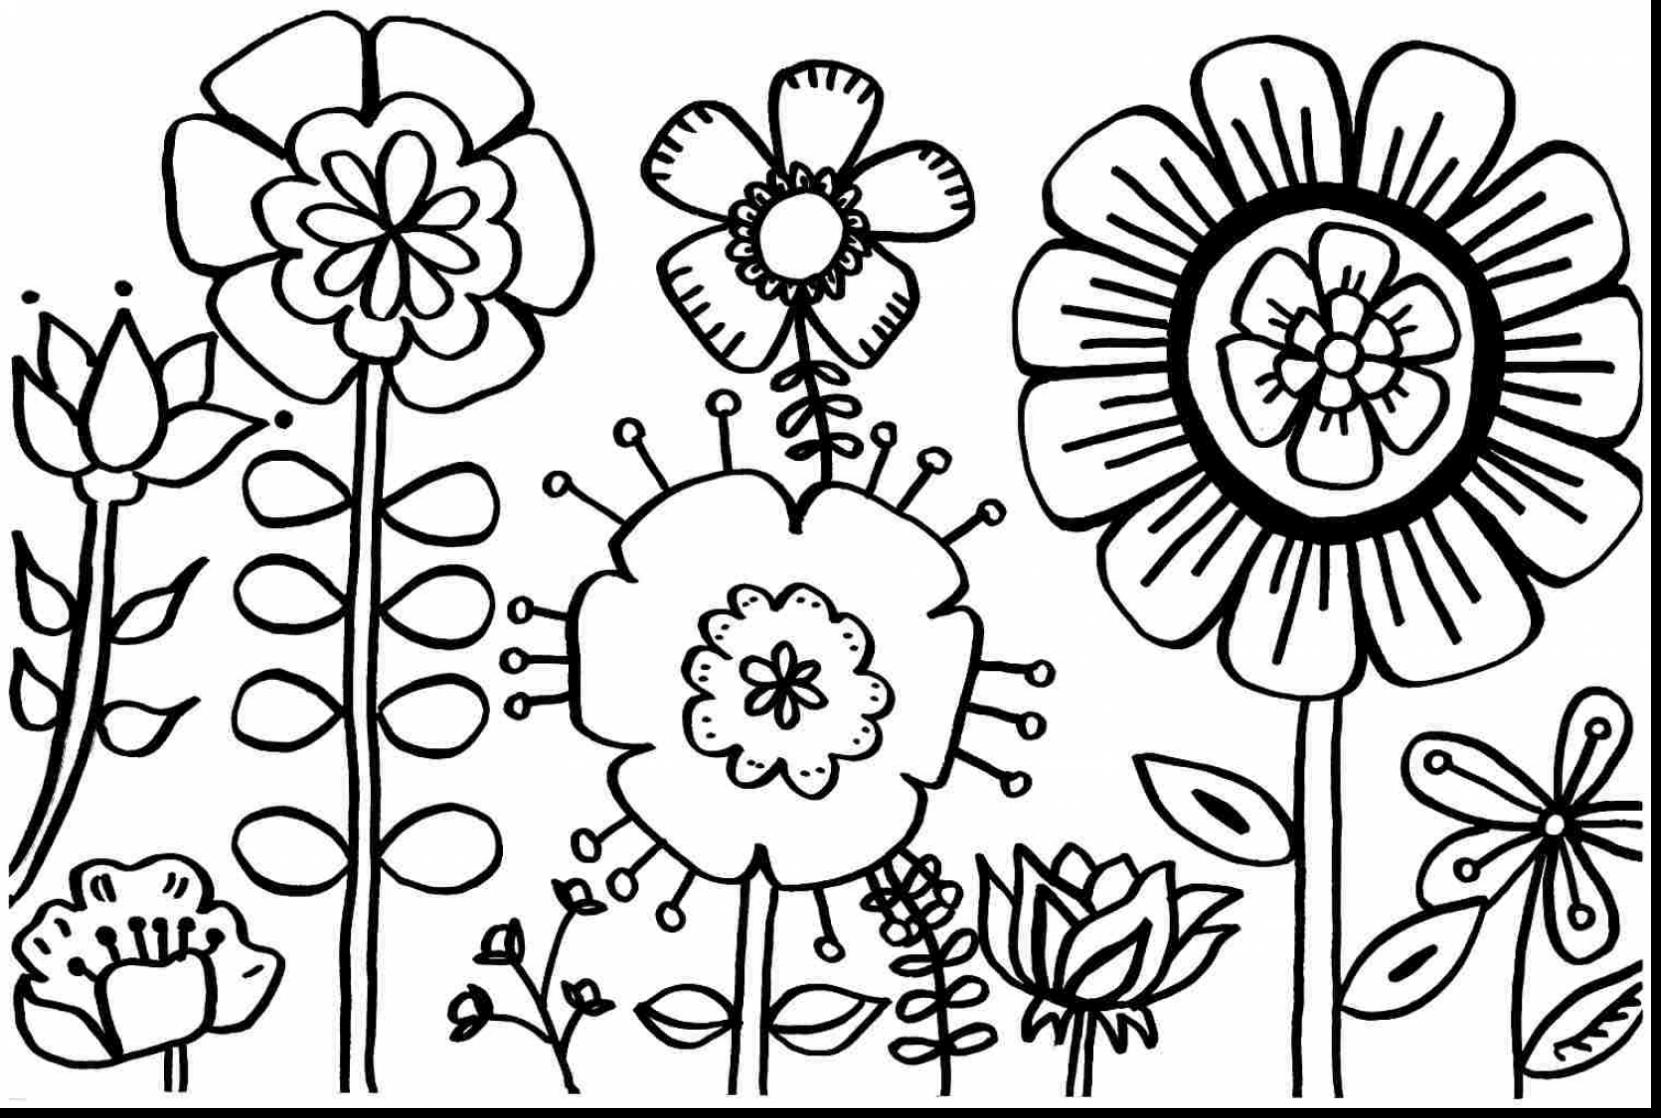 Spring flowers clipart.